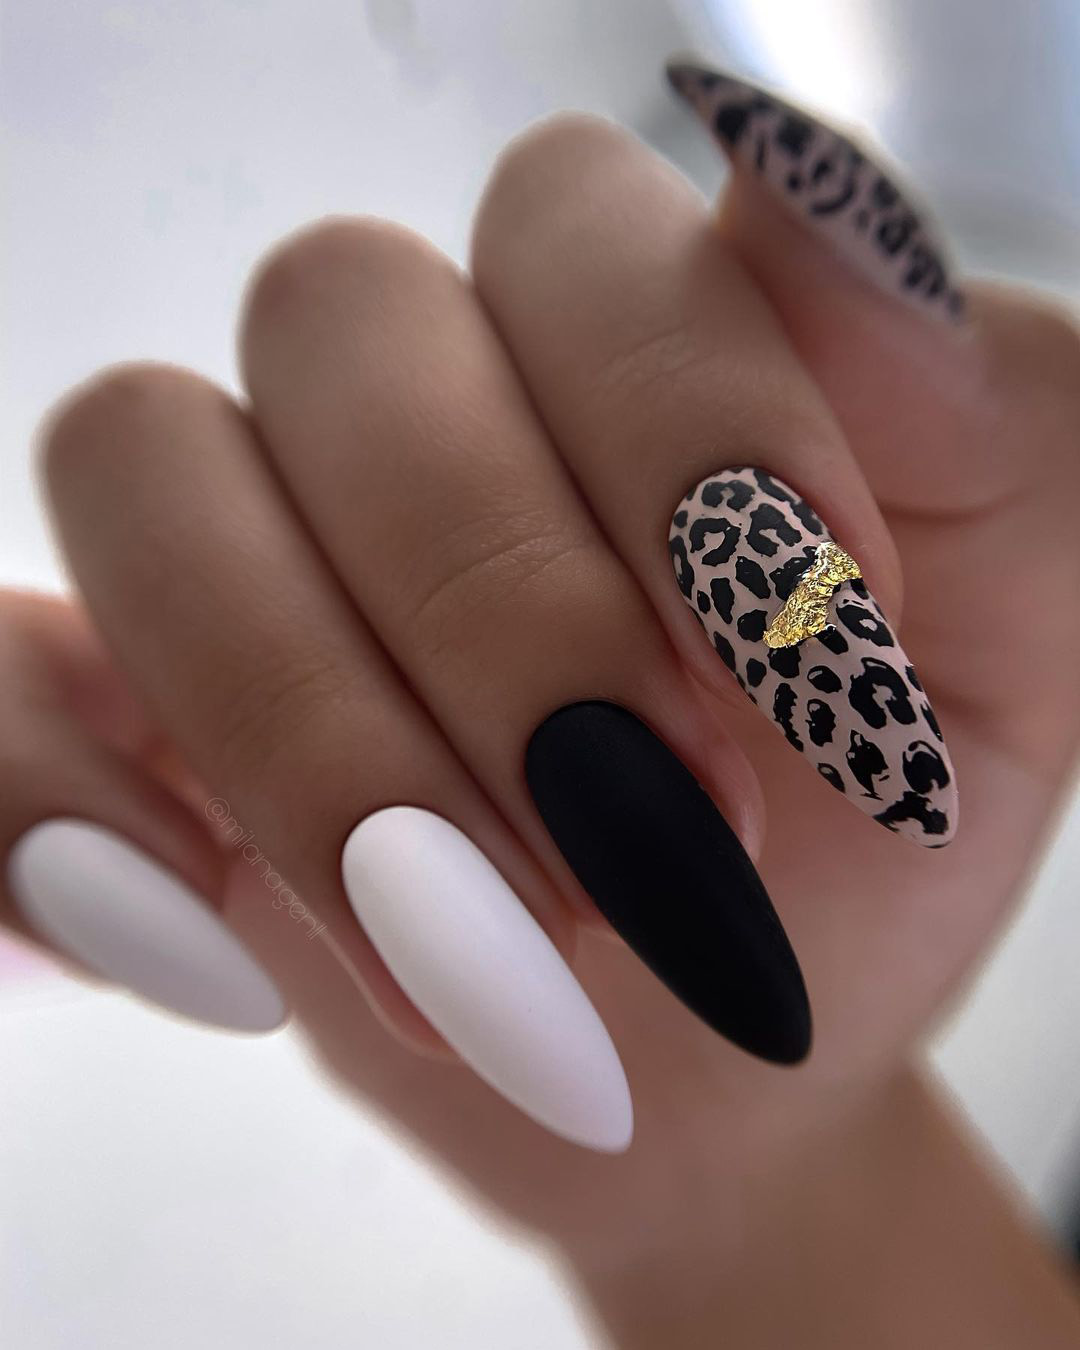 black and gold wedding nails accent on animal print milana.gen11 - Black and Gold Wedding Nail Designs